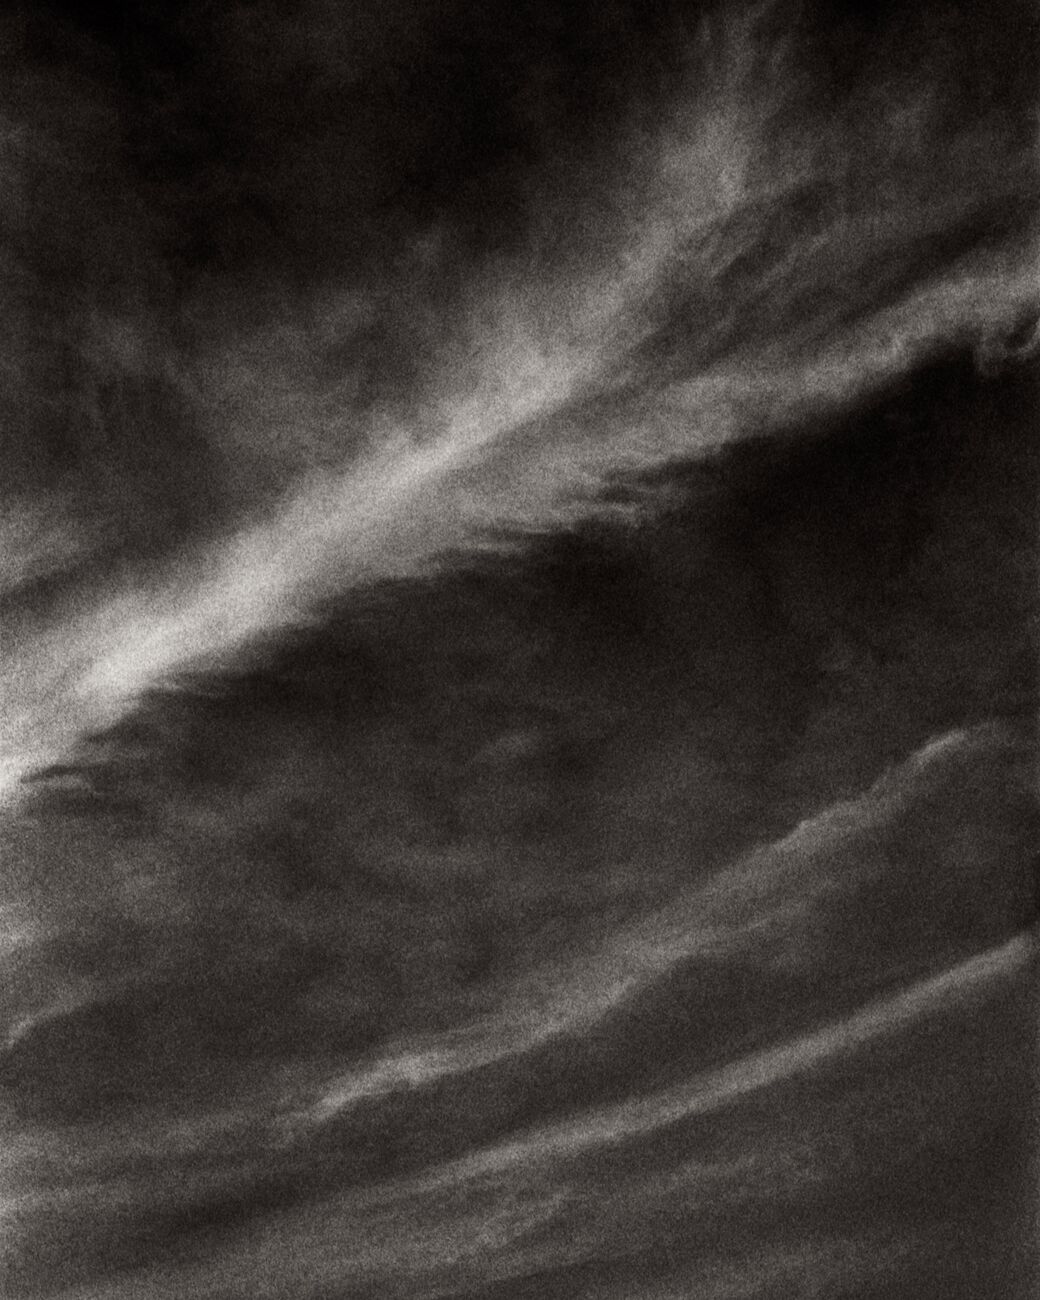 Photography 22 x 27.6 in, Sky, etude 1. Ref-11618-14 - Denis Olivier Photography